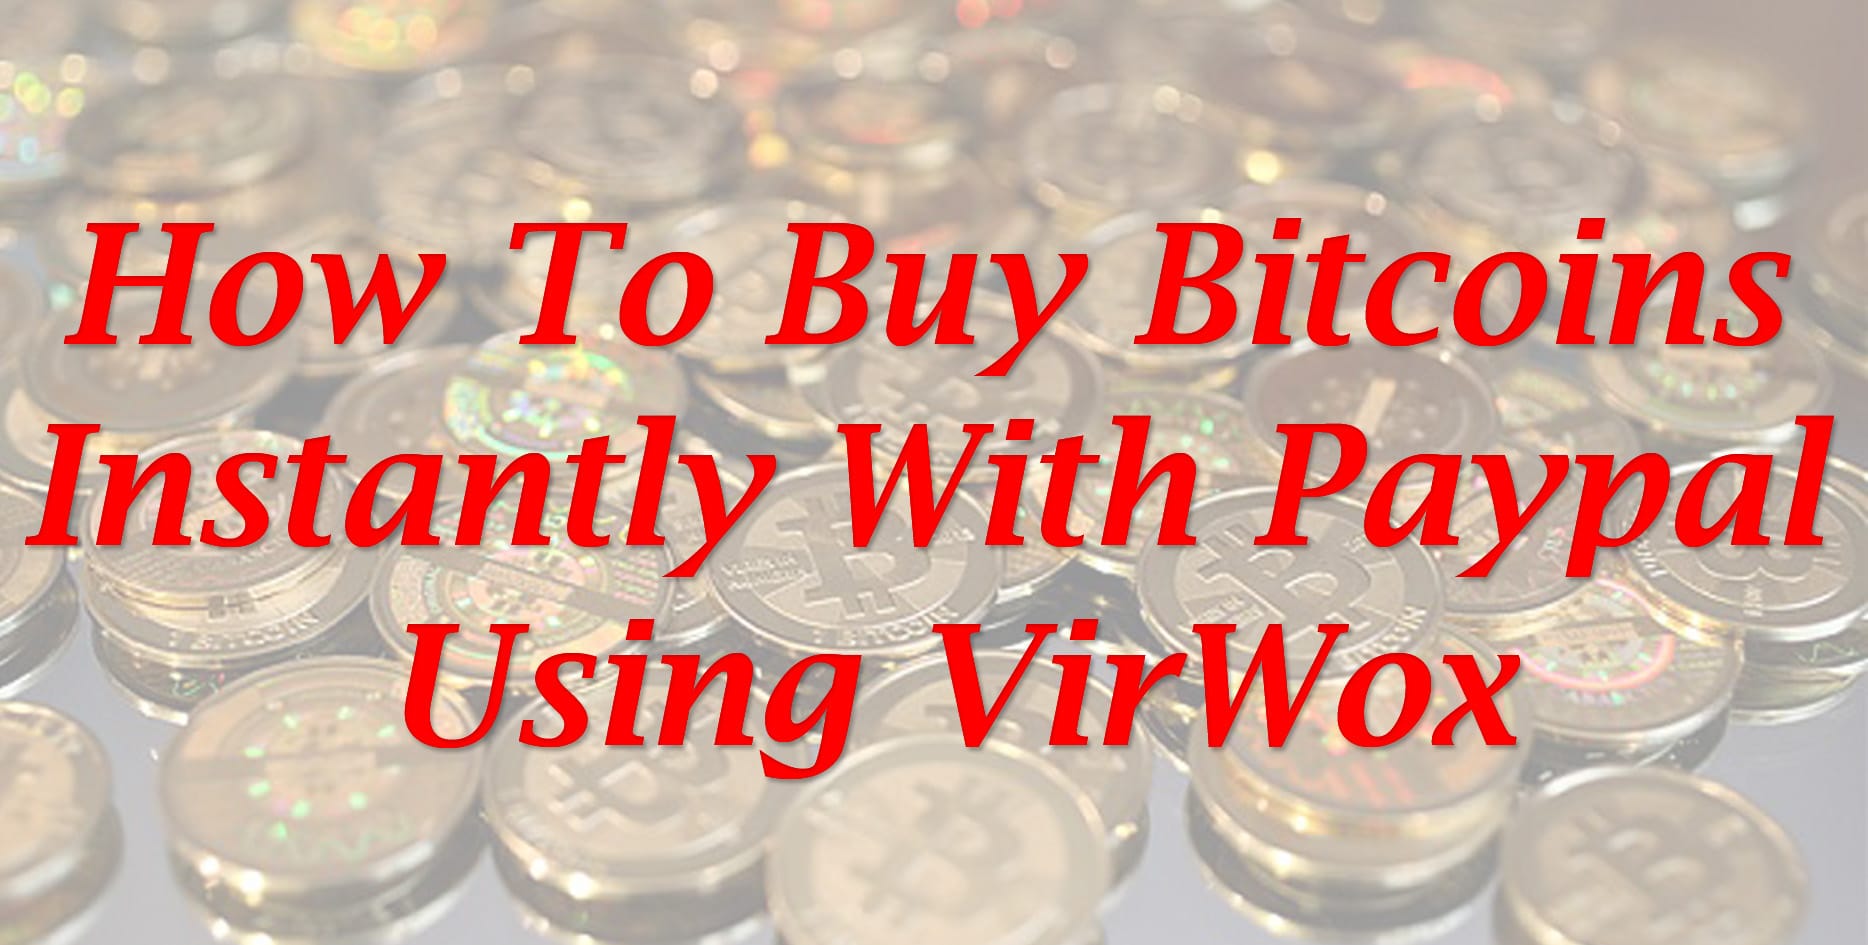 how to buy bitcoins using virwox